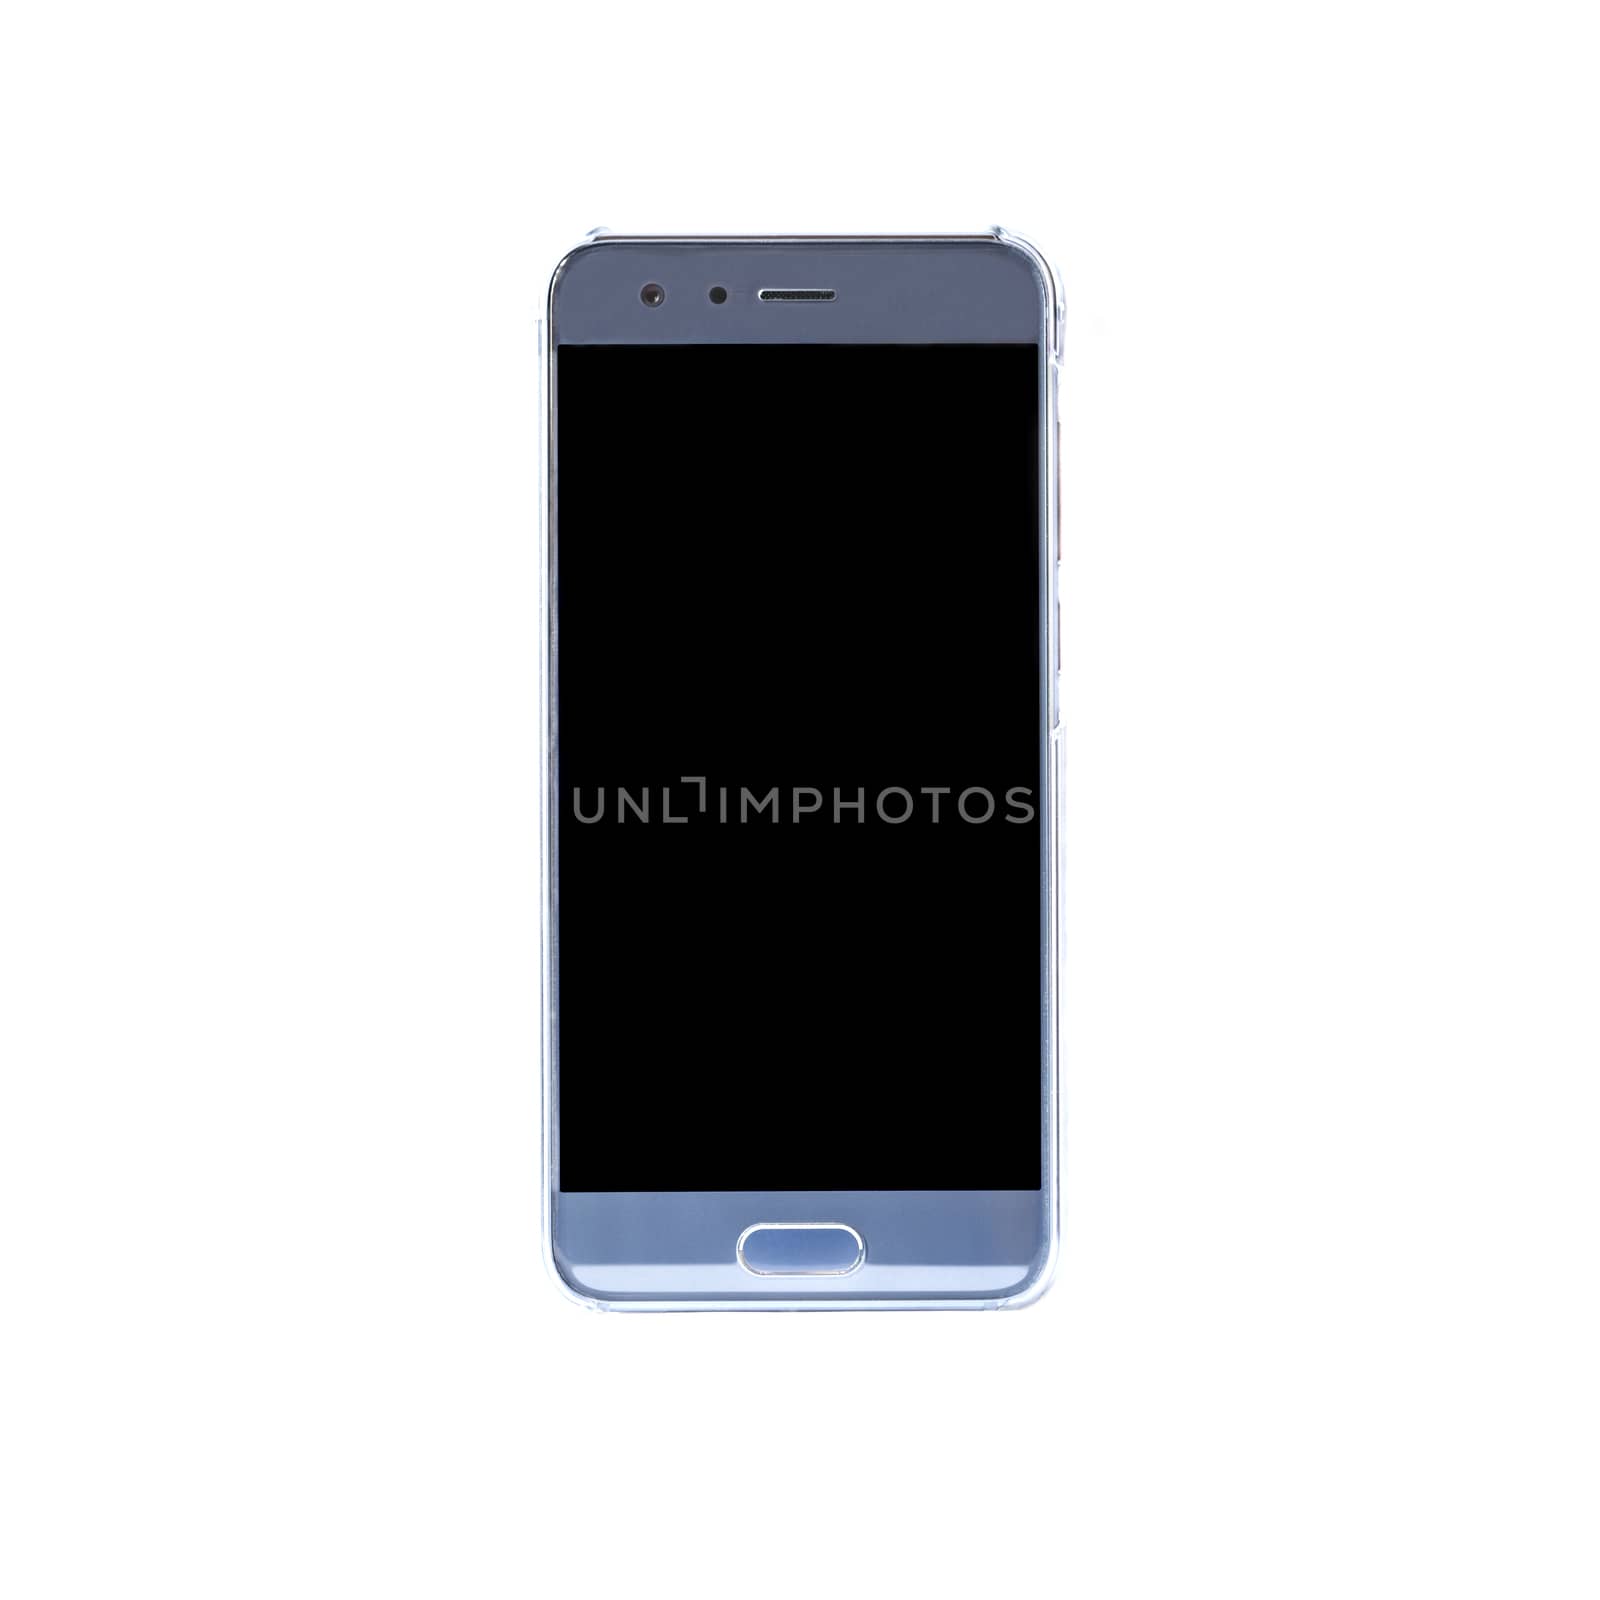 Blue smartphone isolated